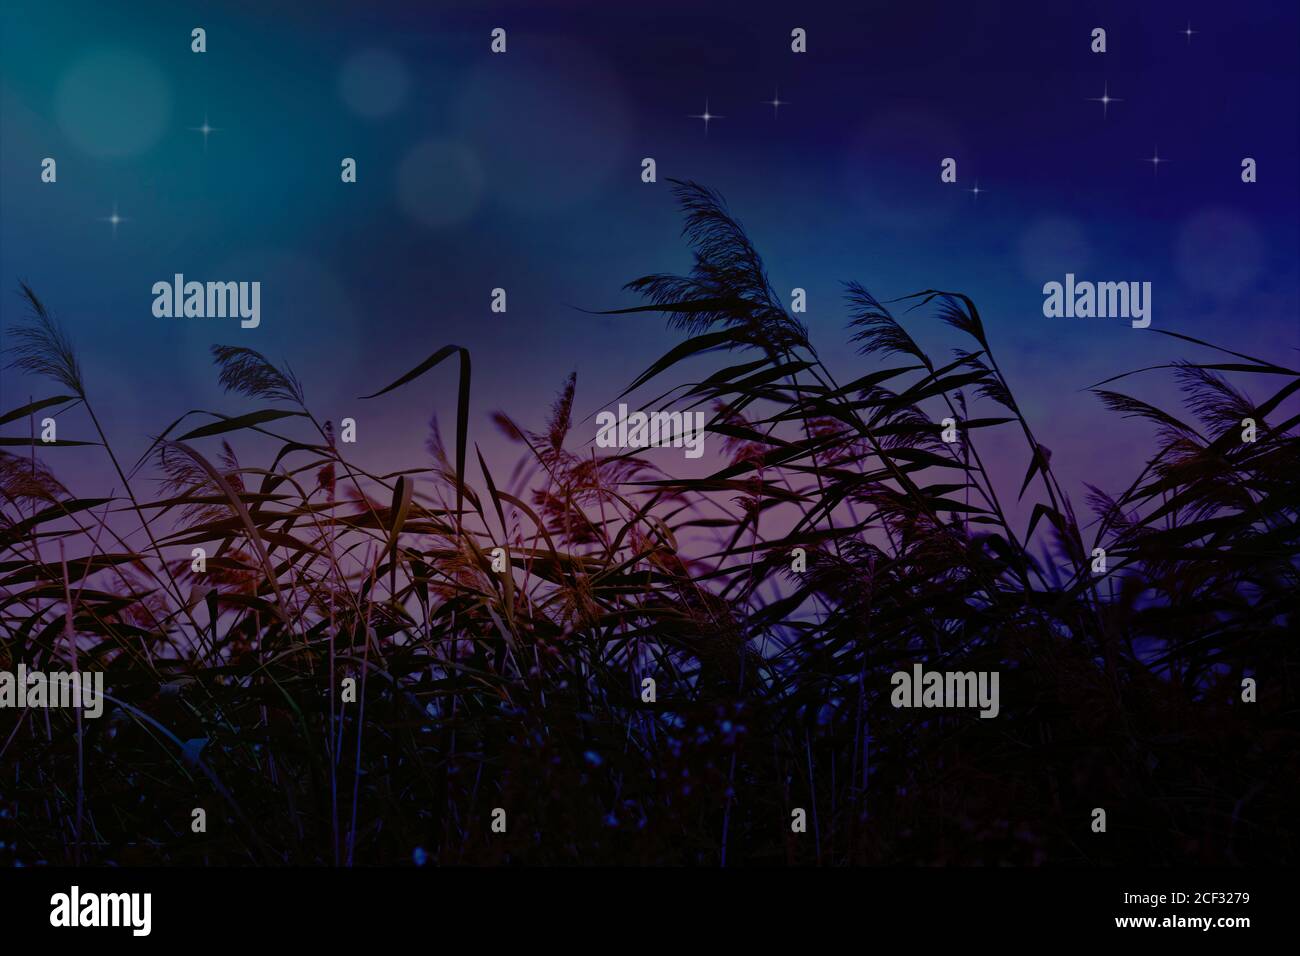 Summer night background - lake reeds with seed panicles. Romantic landscape. Travel and adventure at night. Stock Photo